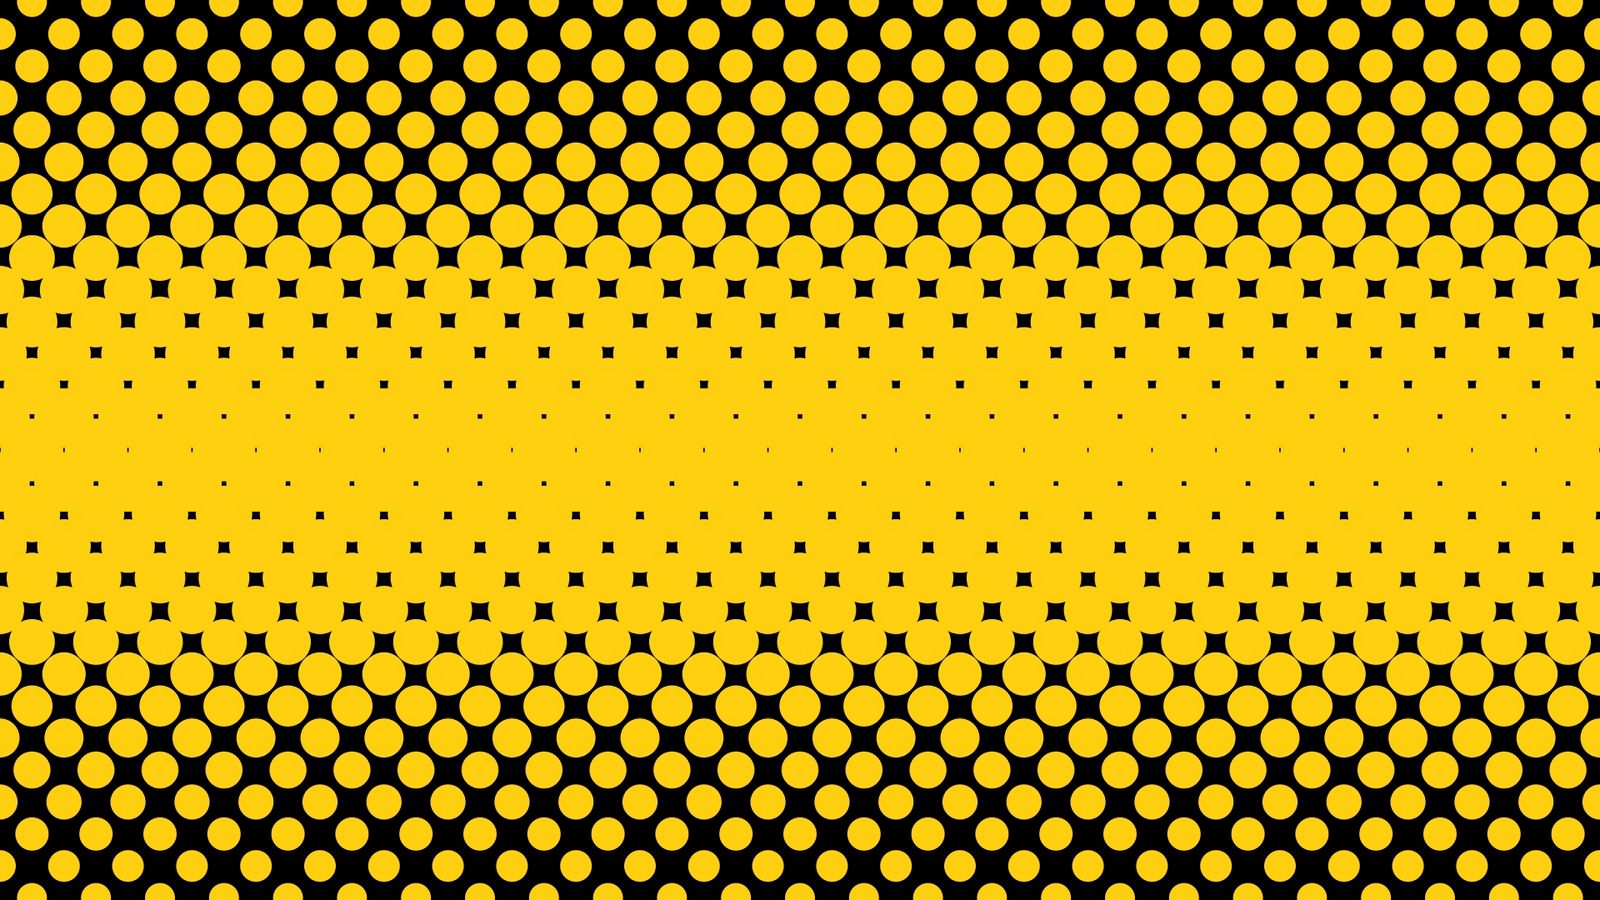 Download wallpaper 1600x900 points, circles, semitone, yellow, black  widescreen 16:9 hd background